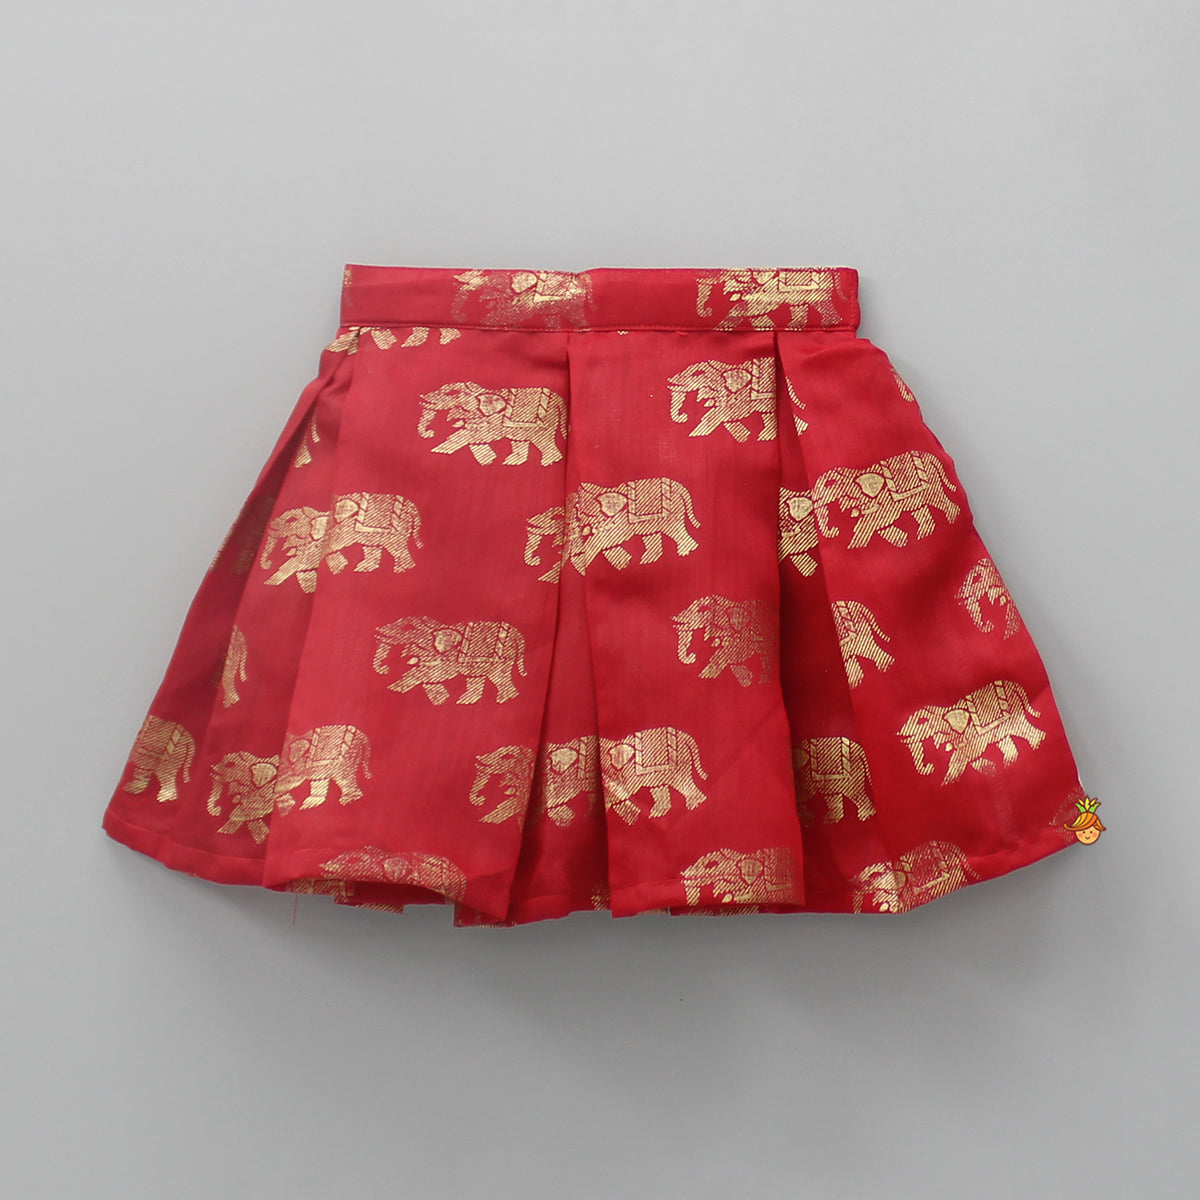 Stylish Red Top And Skirt With Elephant Print